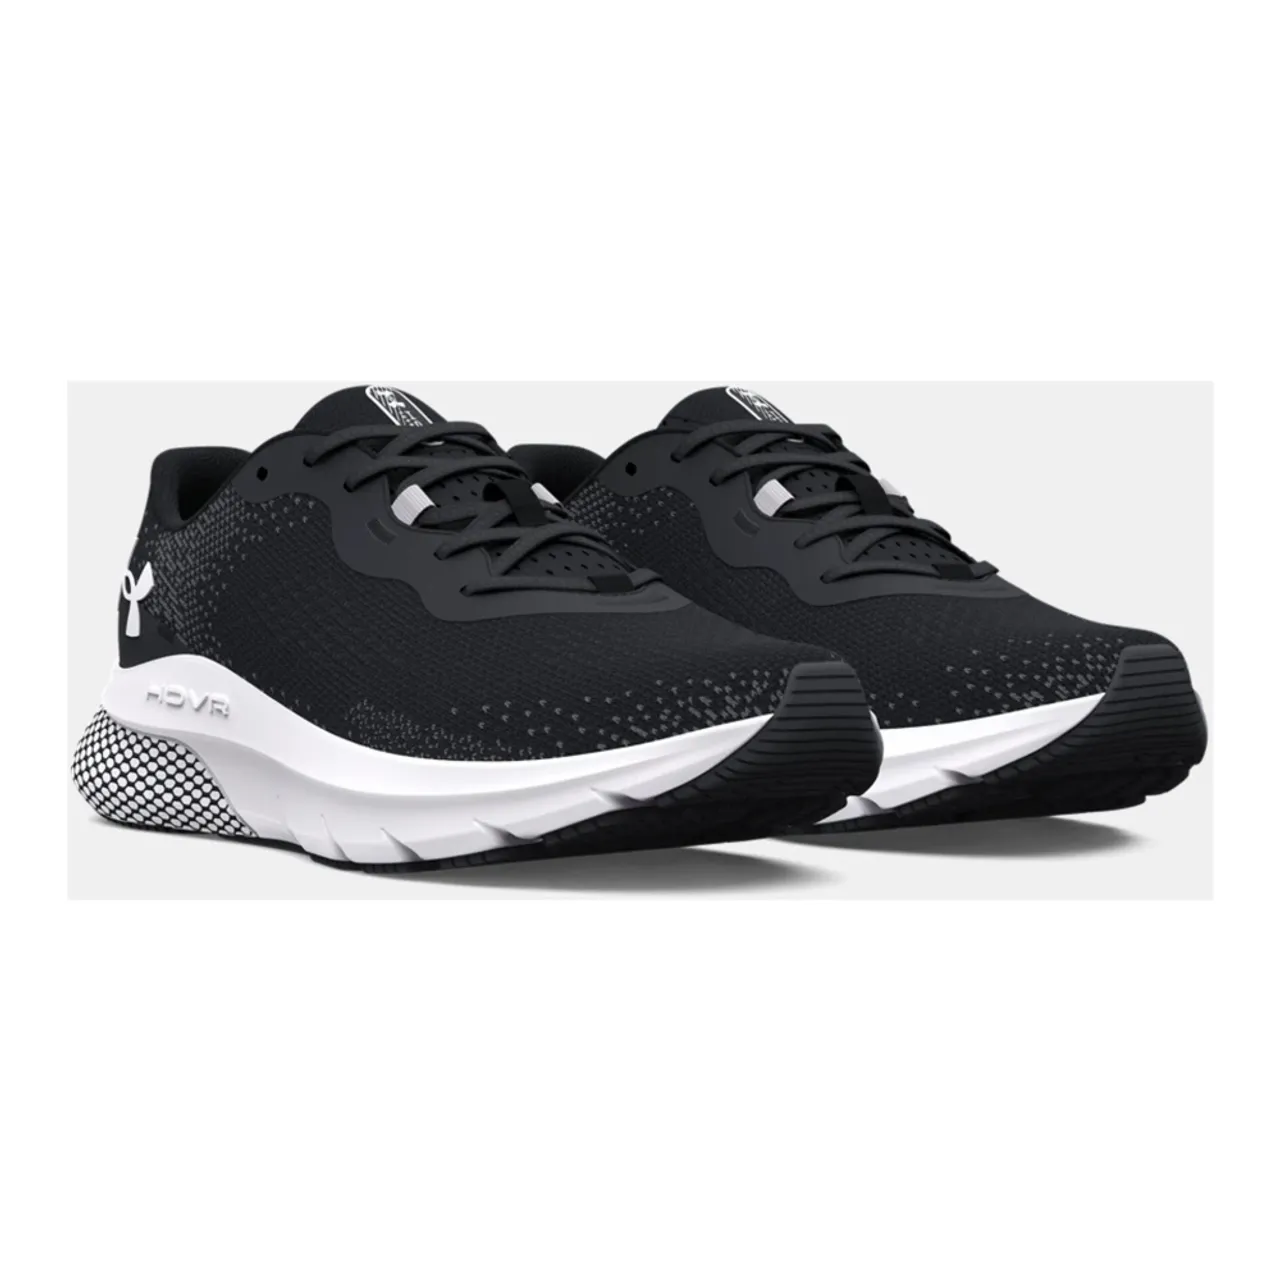 Under Armour , Hovr Turbulence 2 Running Shoes ,Black male, Sizes: